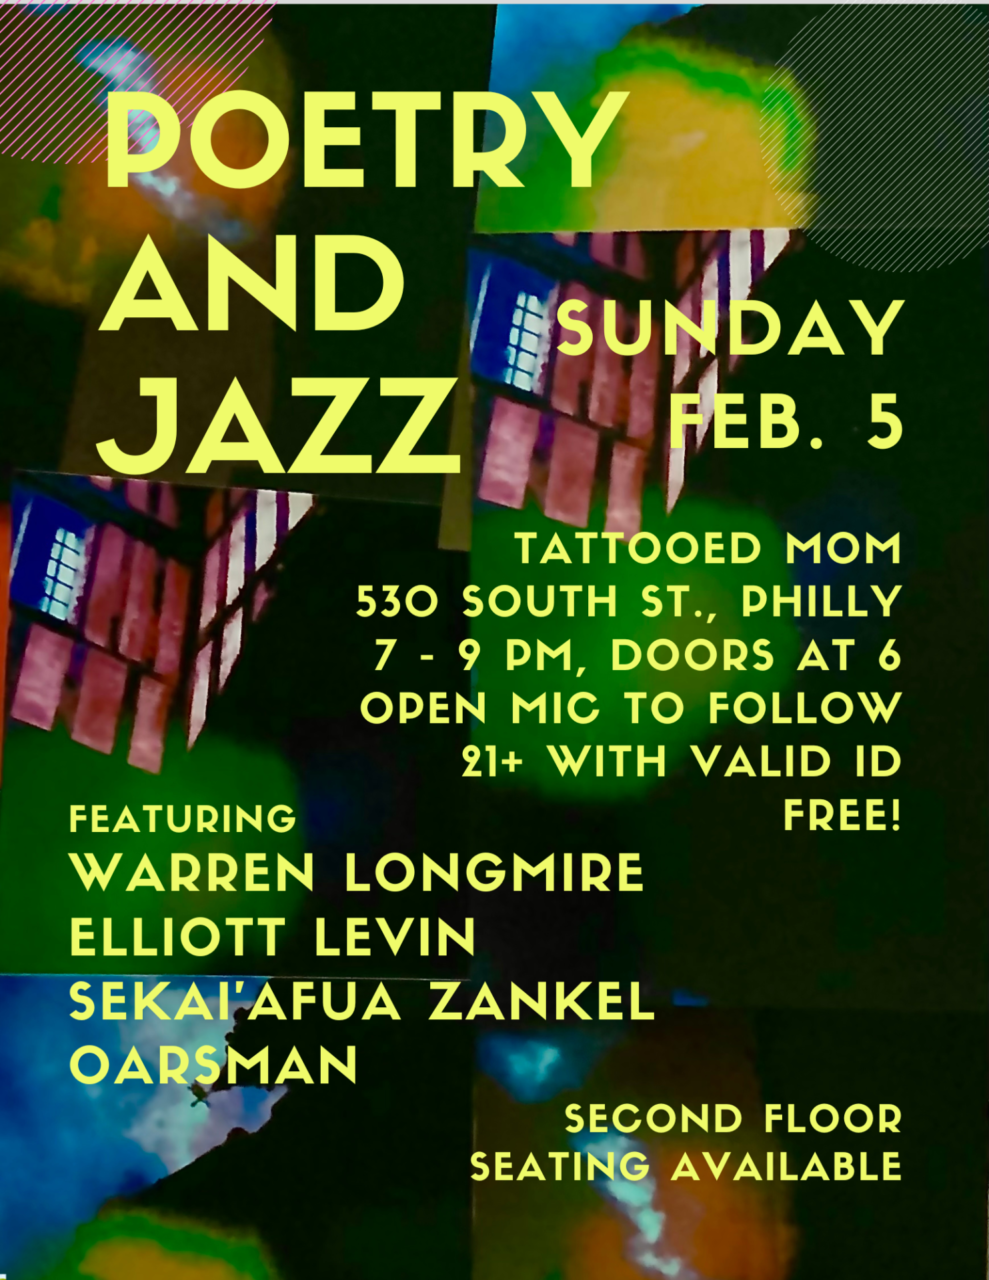 Join us for an evening of poetry and jazz from local Philadelphian authors, musicians, and performers.